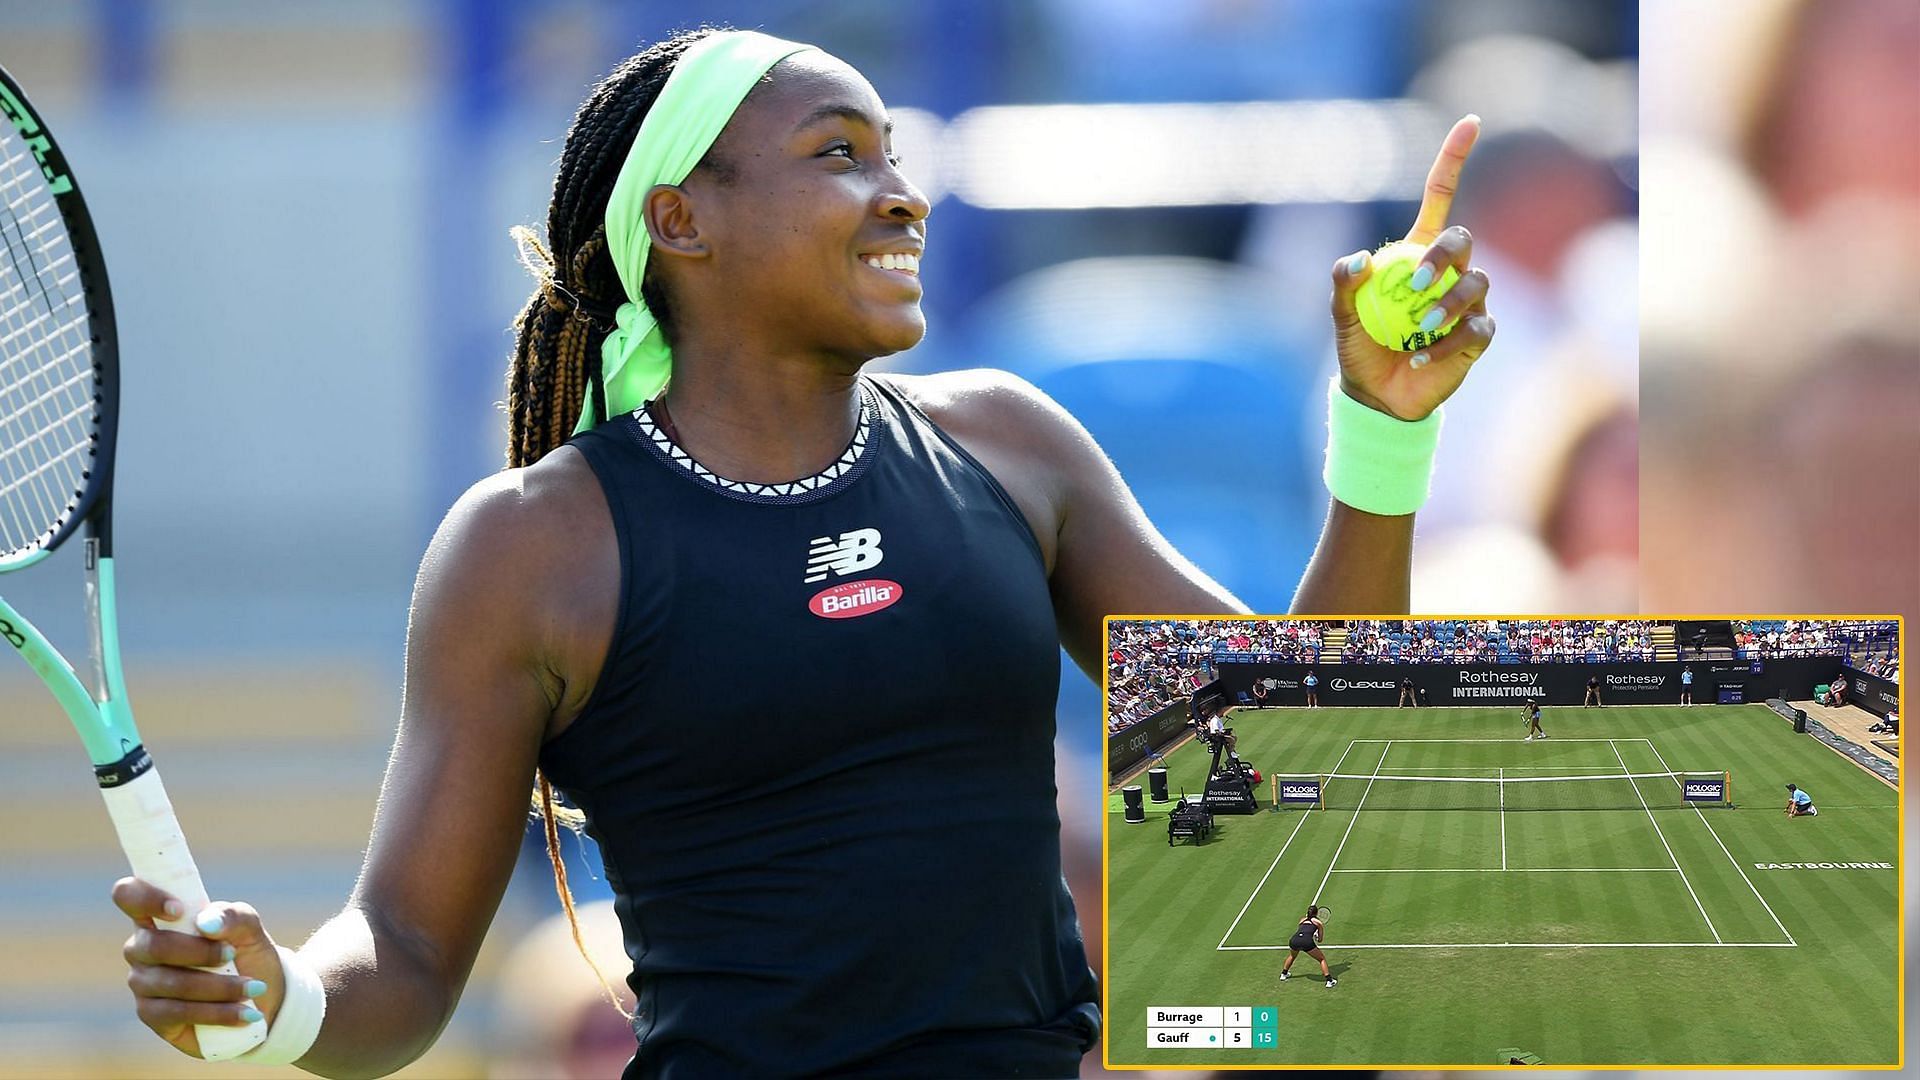 Coco Gauff reacts to hilarious video of seagulls seemingly laughing at her failed ball toss in Eastbourne